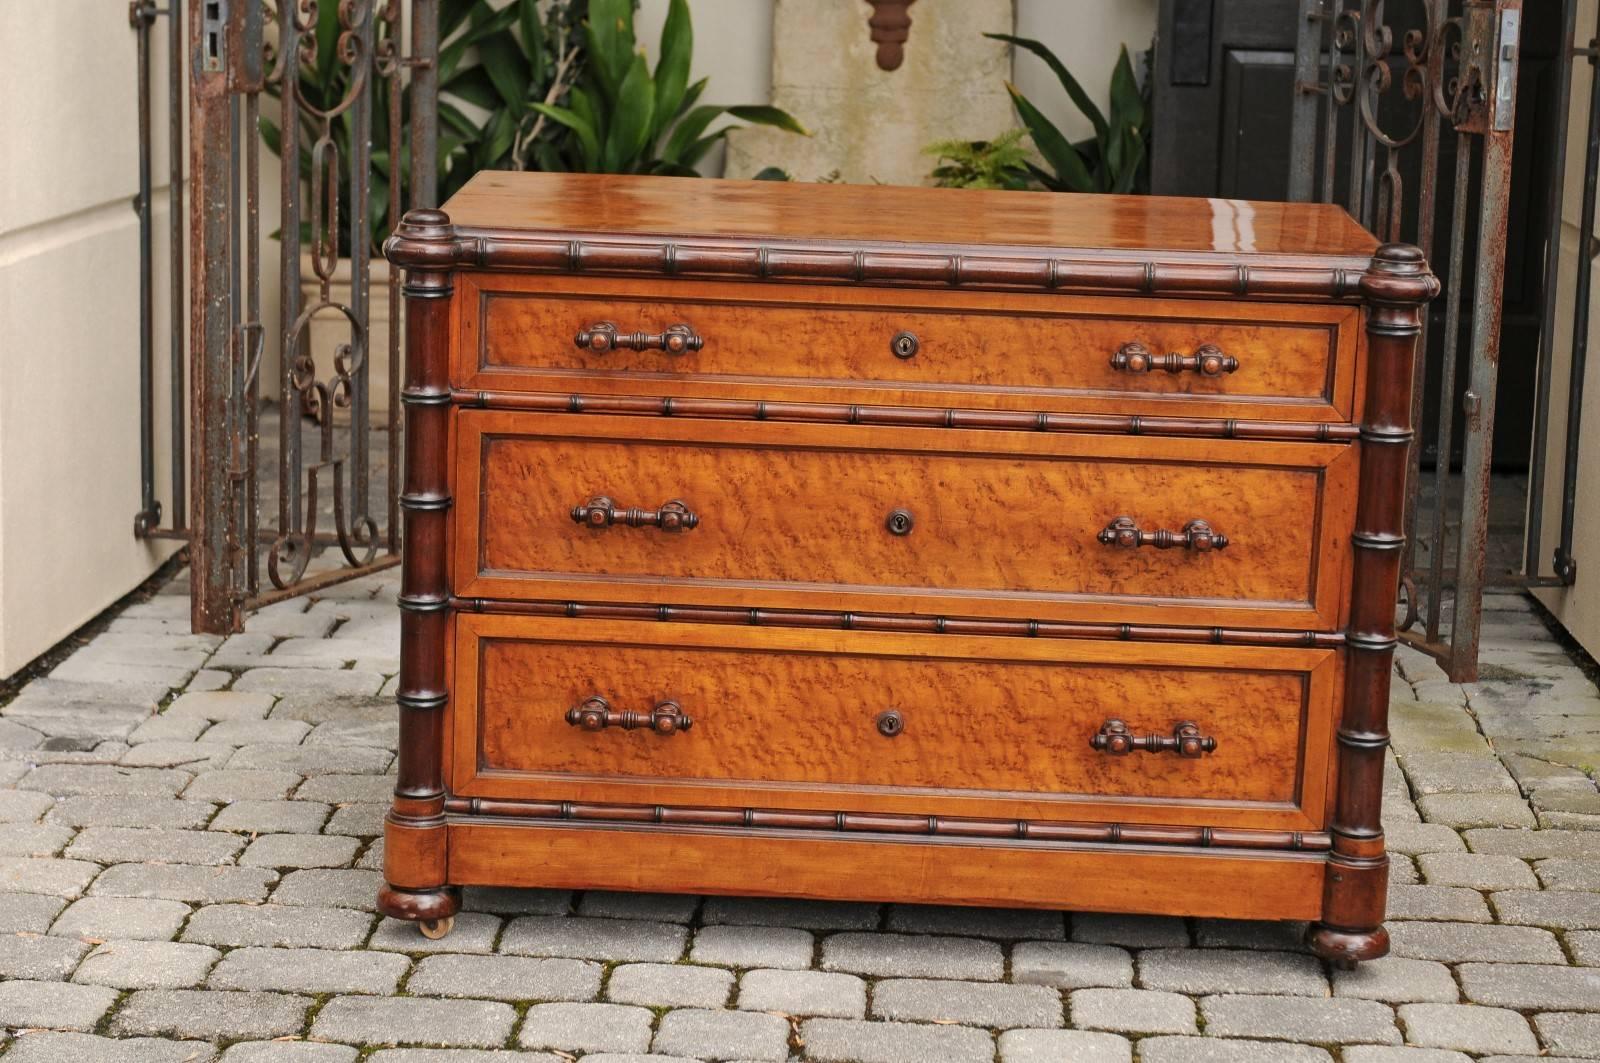 An English faux-bamboo and burled walnut veneered three-drawer commode from the late 19th century. This English chest features an exquisite burled walnut structure, accented by a faux-bamboo frame of darker tones. A rectangular top sits above three